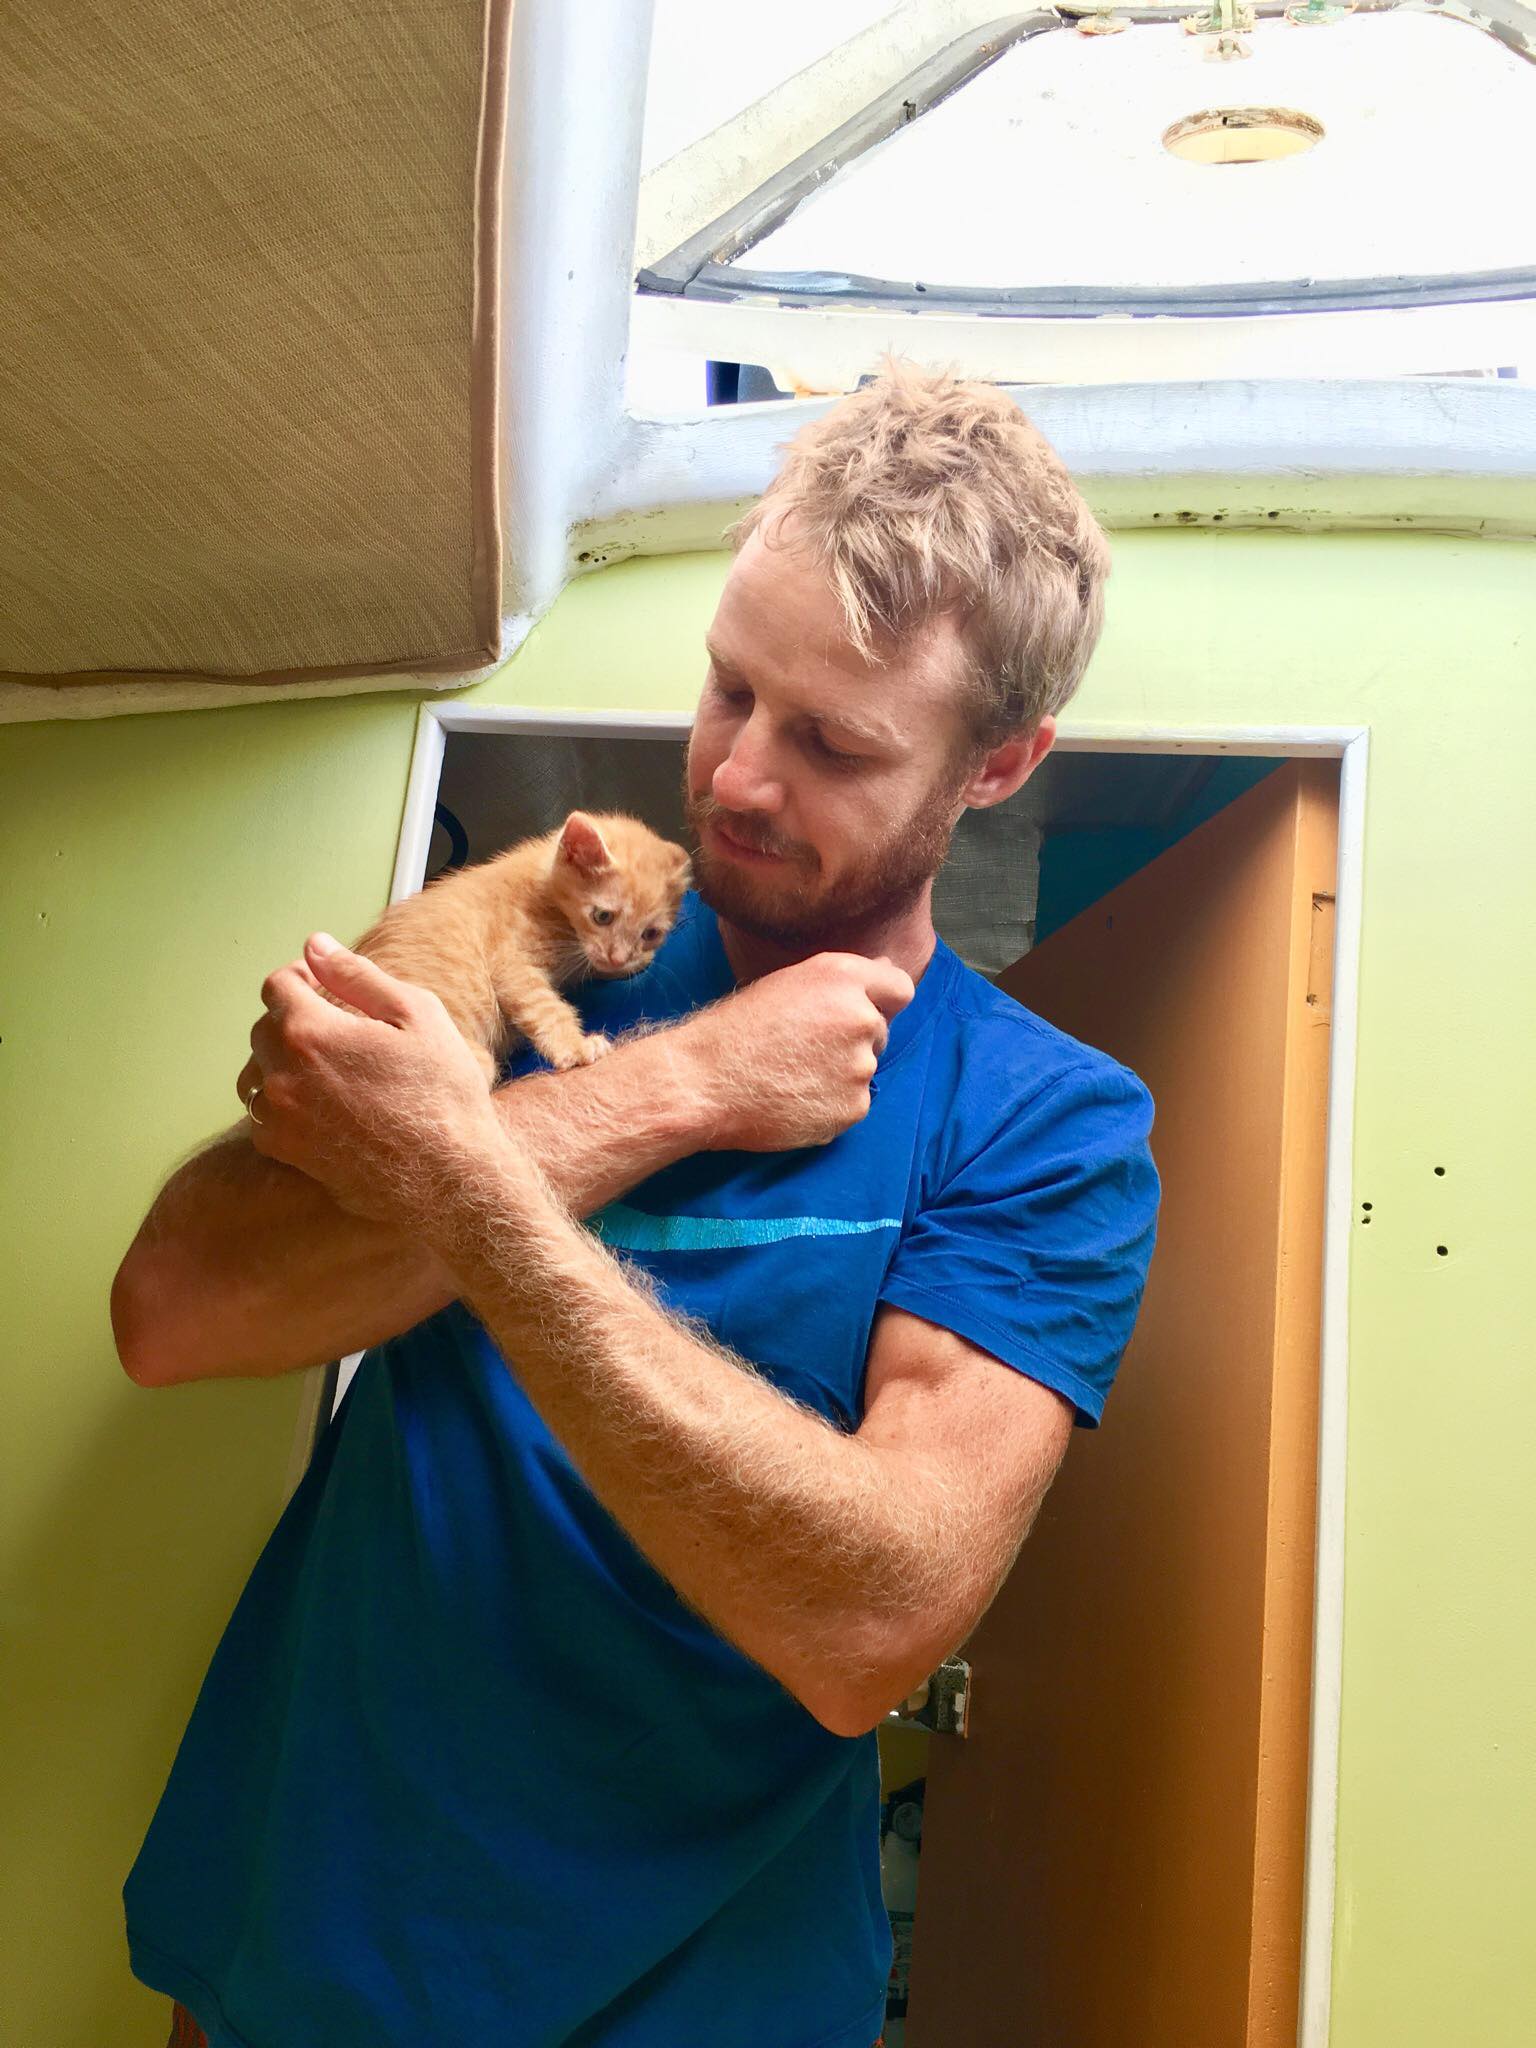 Liveaboard Life Day 138 - 143: Welcoming a new member of our small family!